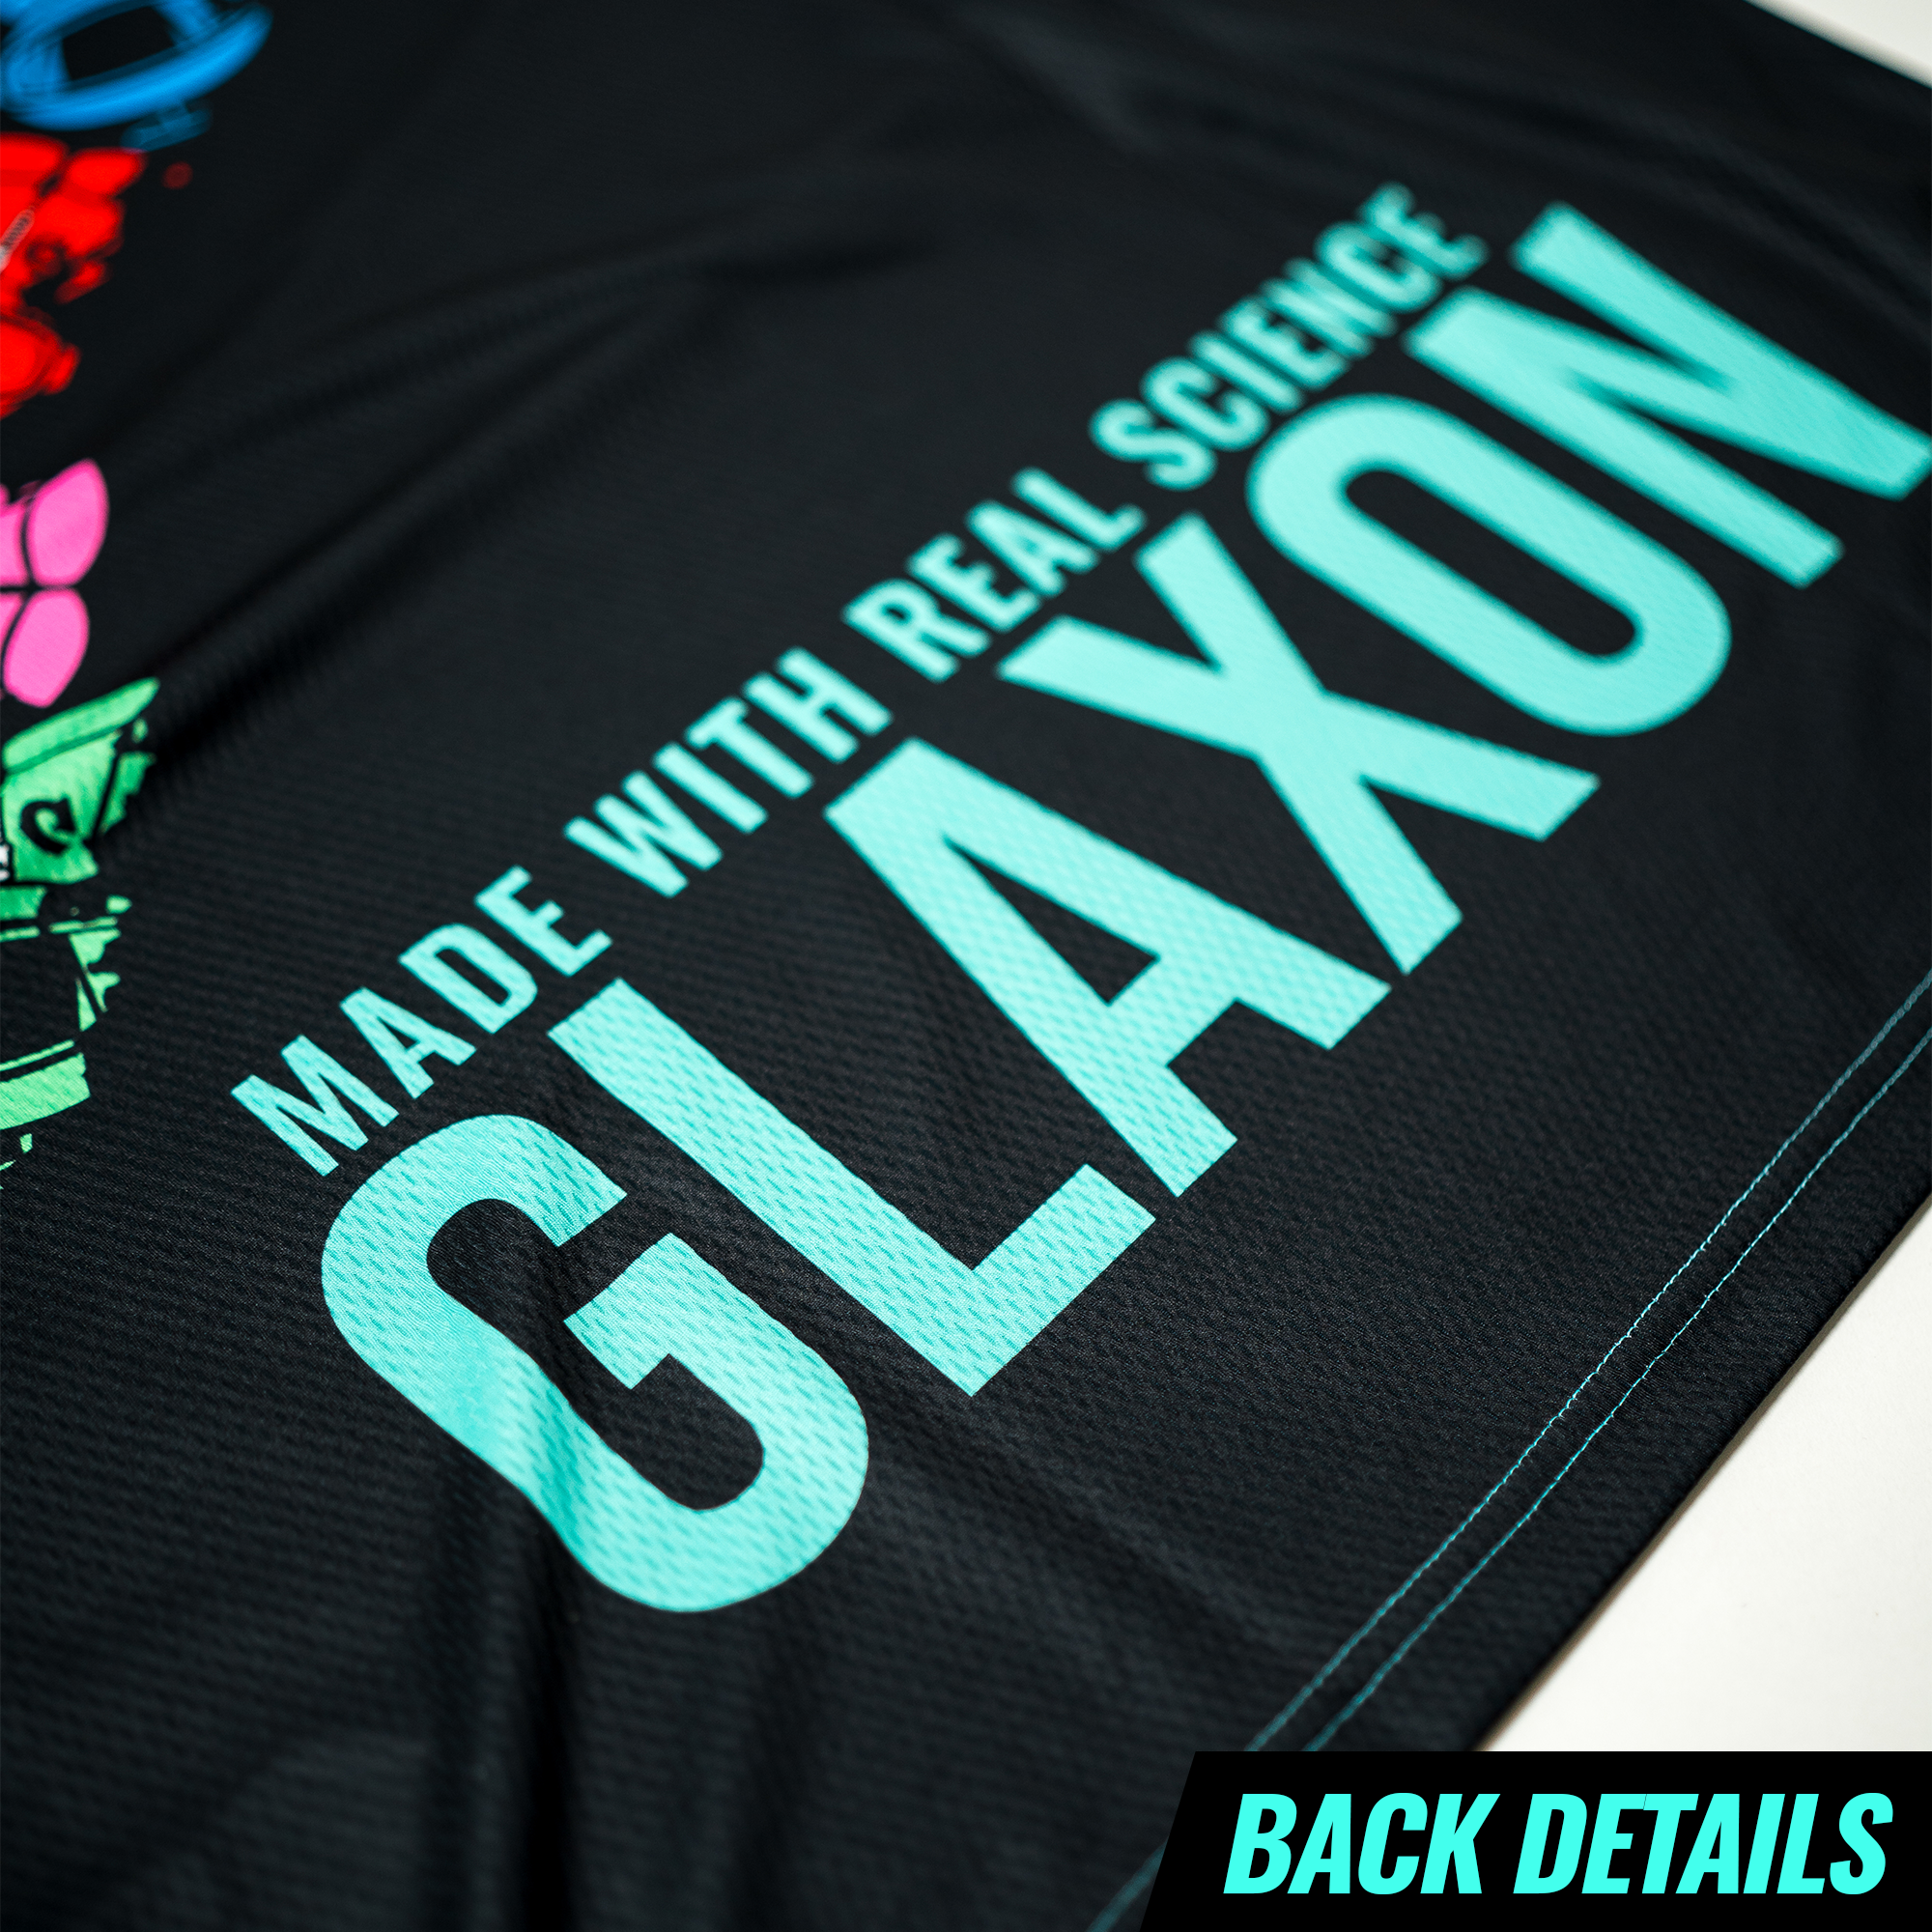 Glaxon el classico jersey, front facing, mesh material, soccer jersey, slightly oversized fit, back details